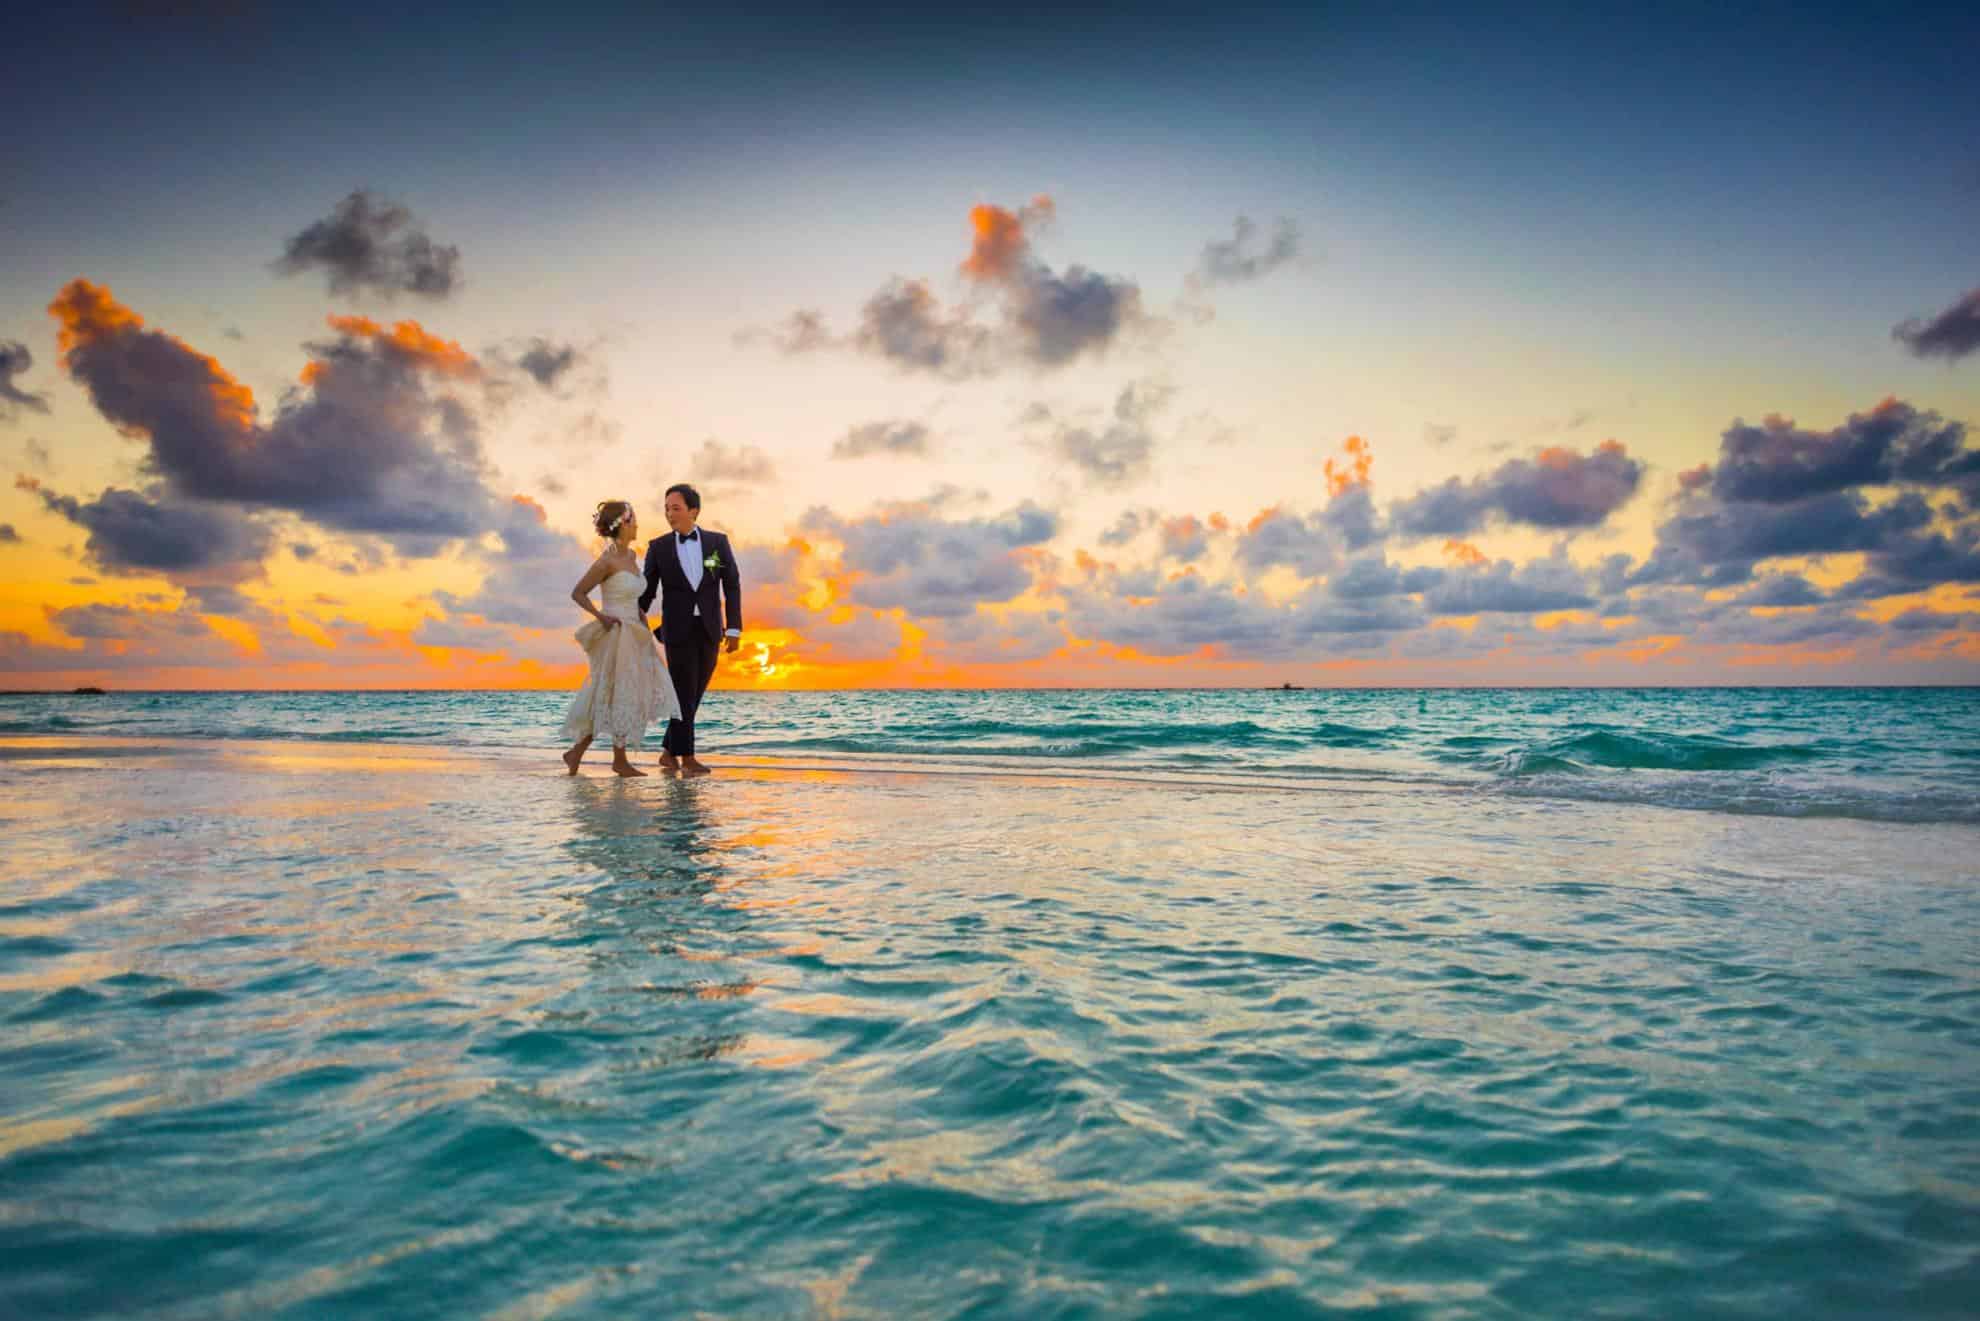 8 Vow Renewal Ideas That May Inspire You to Plan Your Own